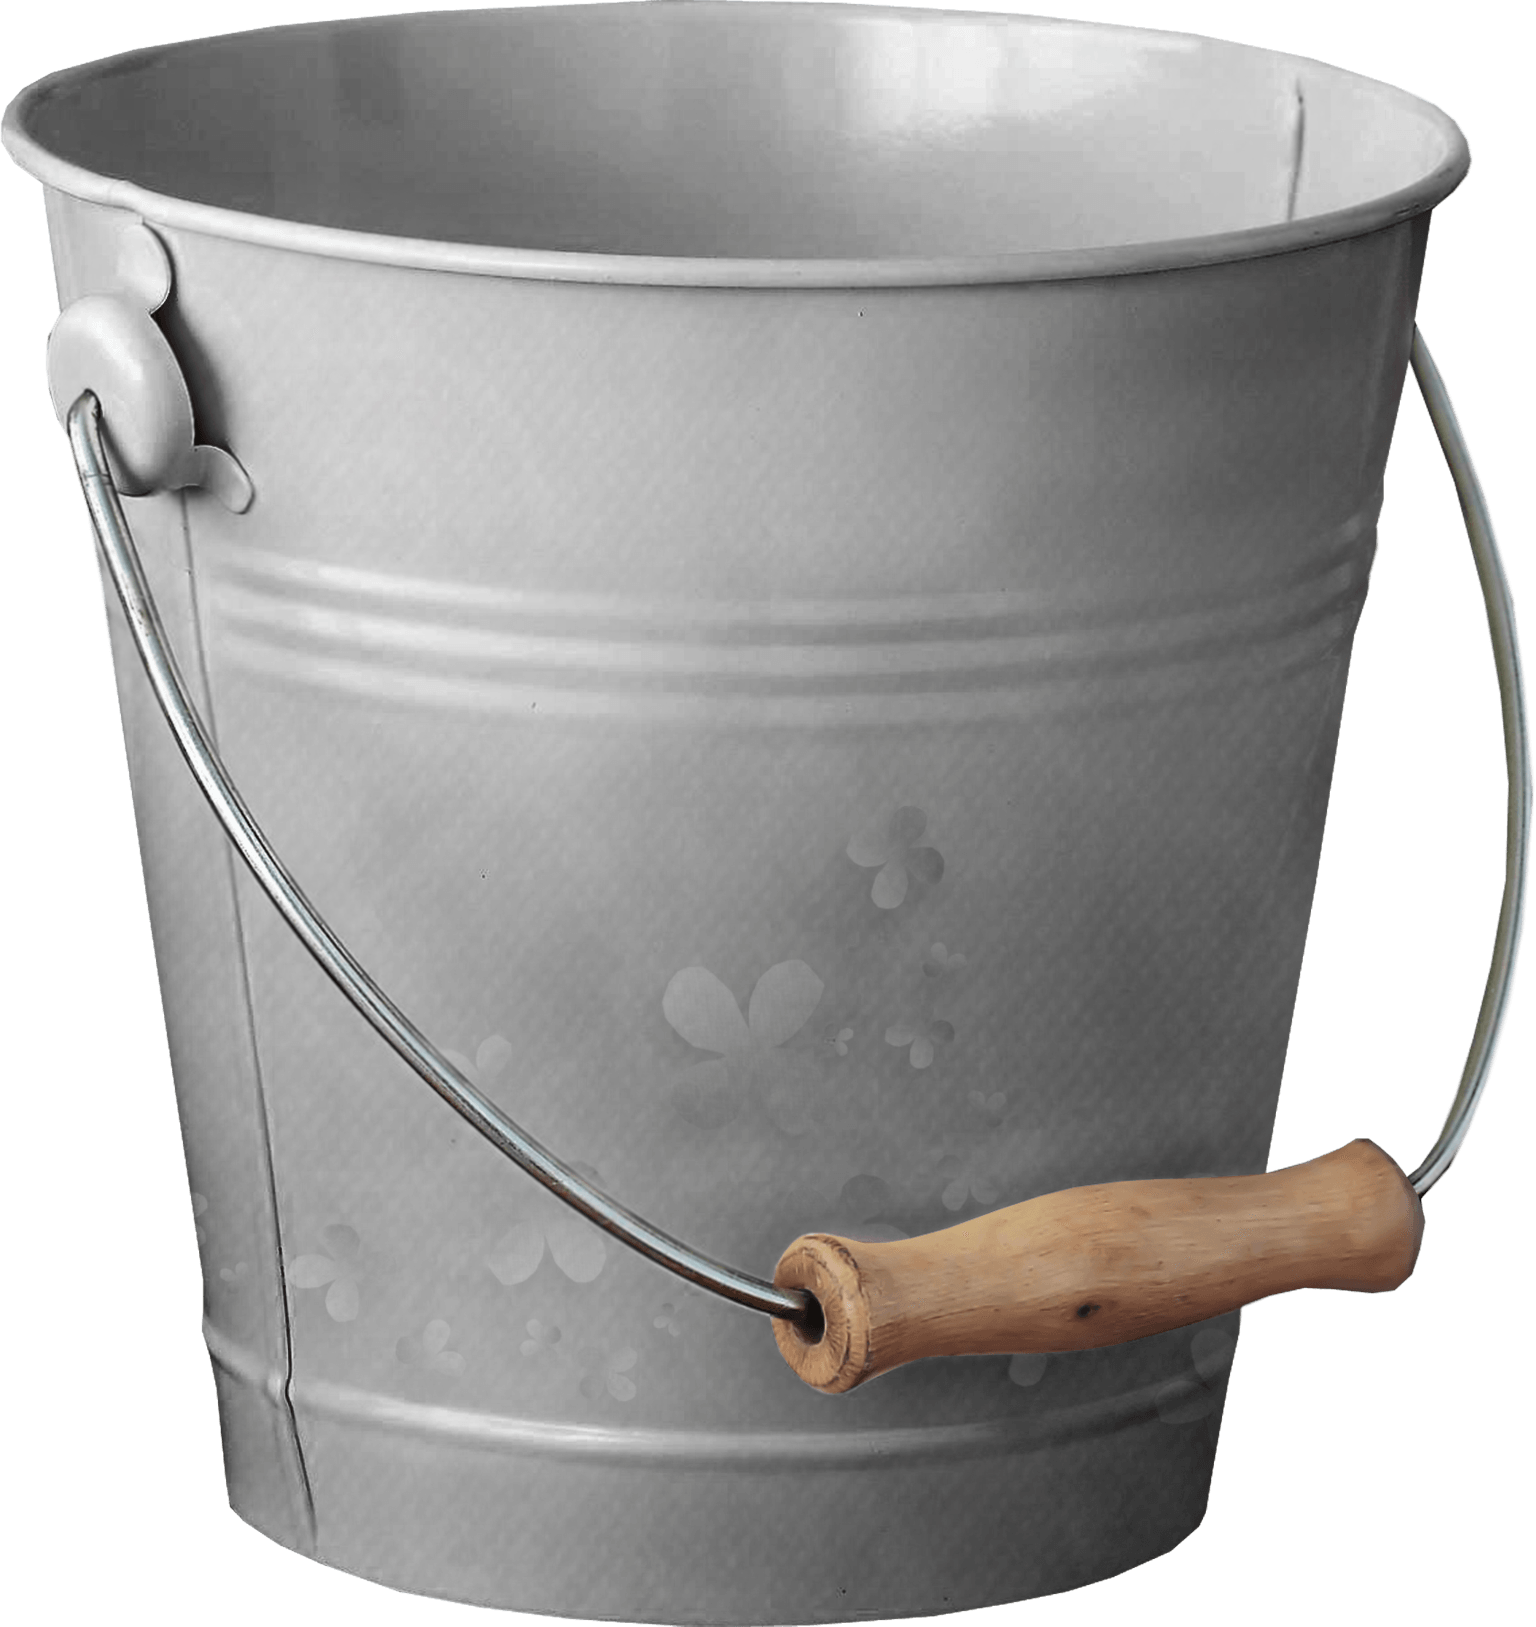 Iron Bucket Png Image Download PNG Image